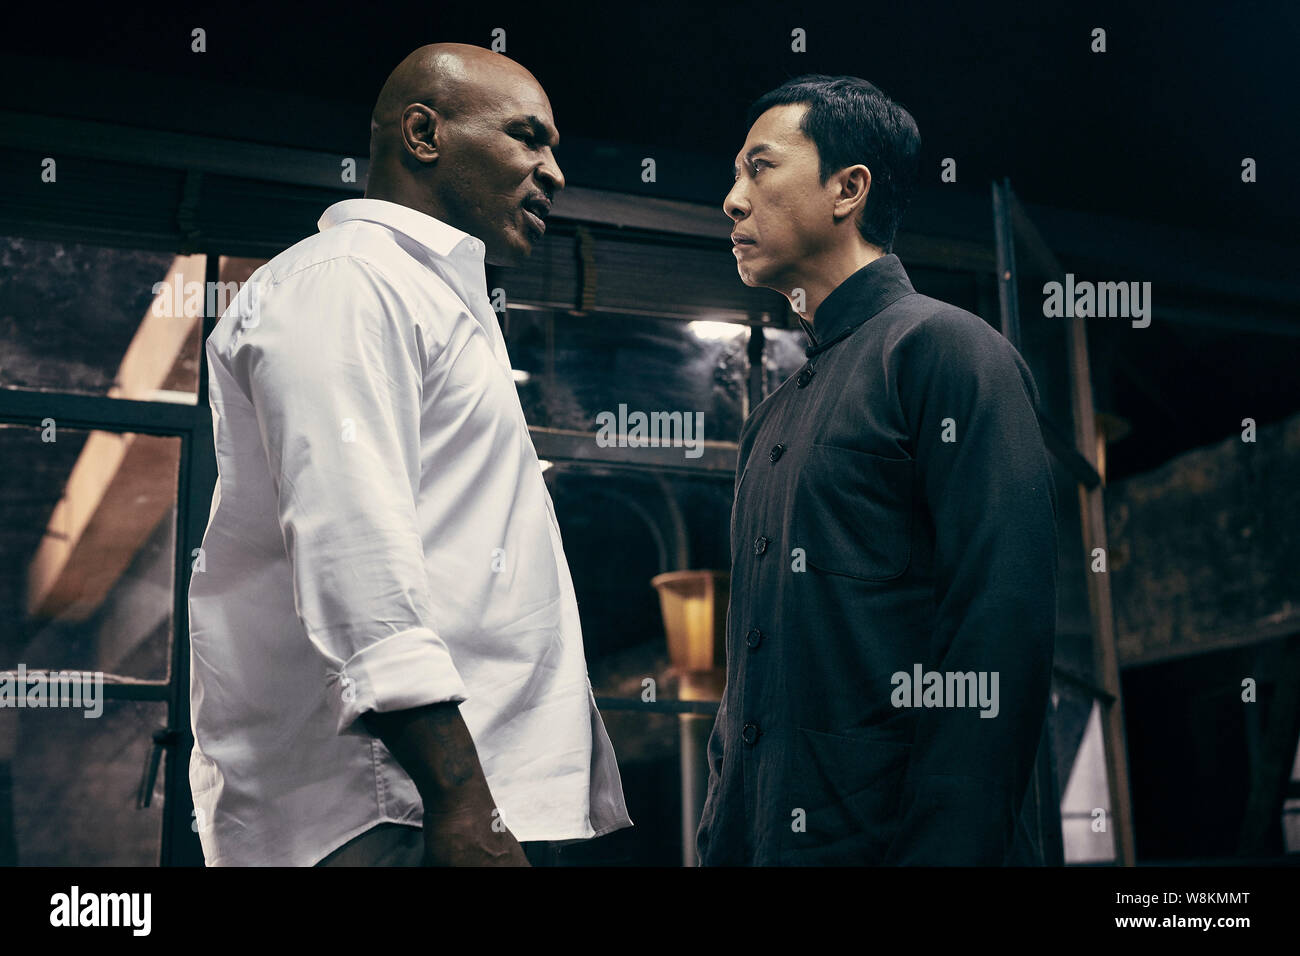 Handout Still Of The Movie Ip Man 3 Featuring American Boxer Mike Tyson Left And Hong Kong Actor Donnie Yen China S Film Regulators Suspended T Stock Photo Alamy